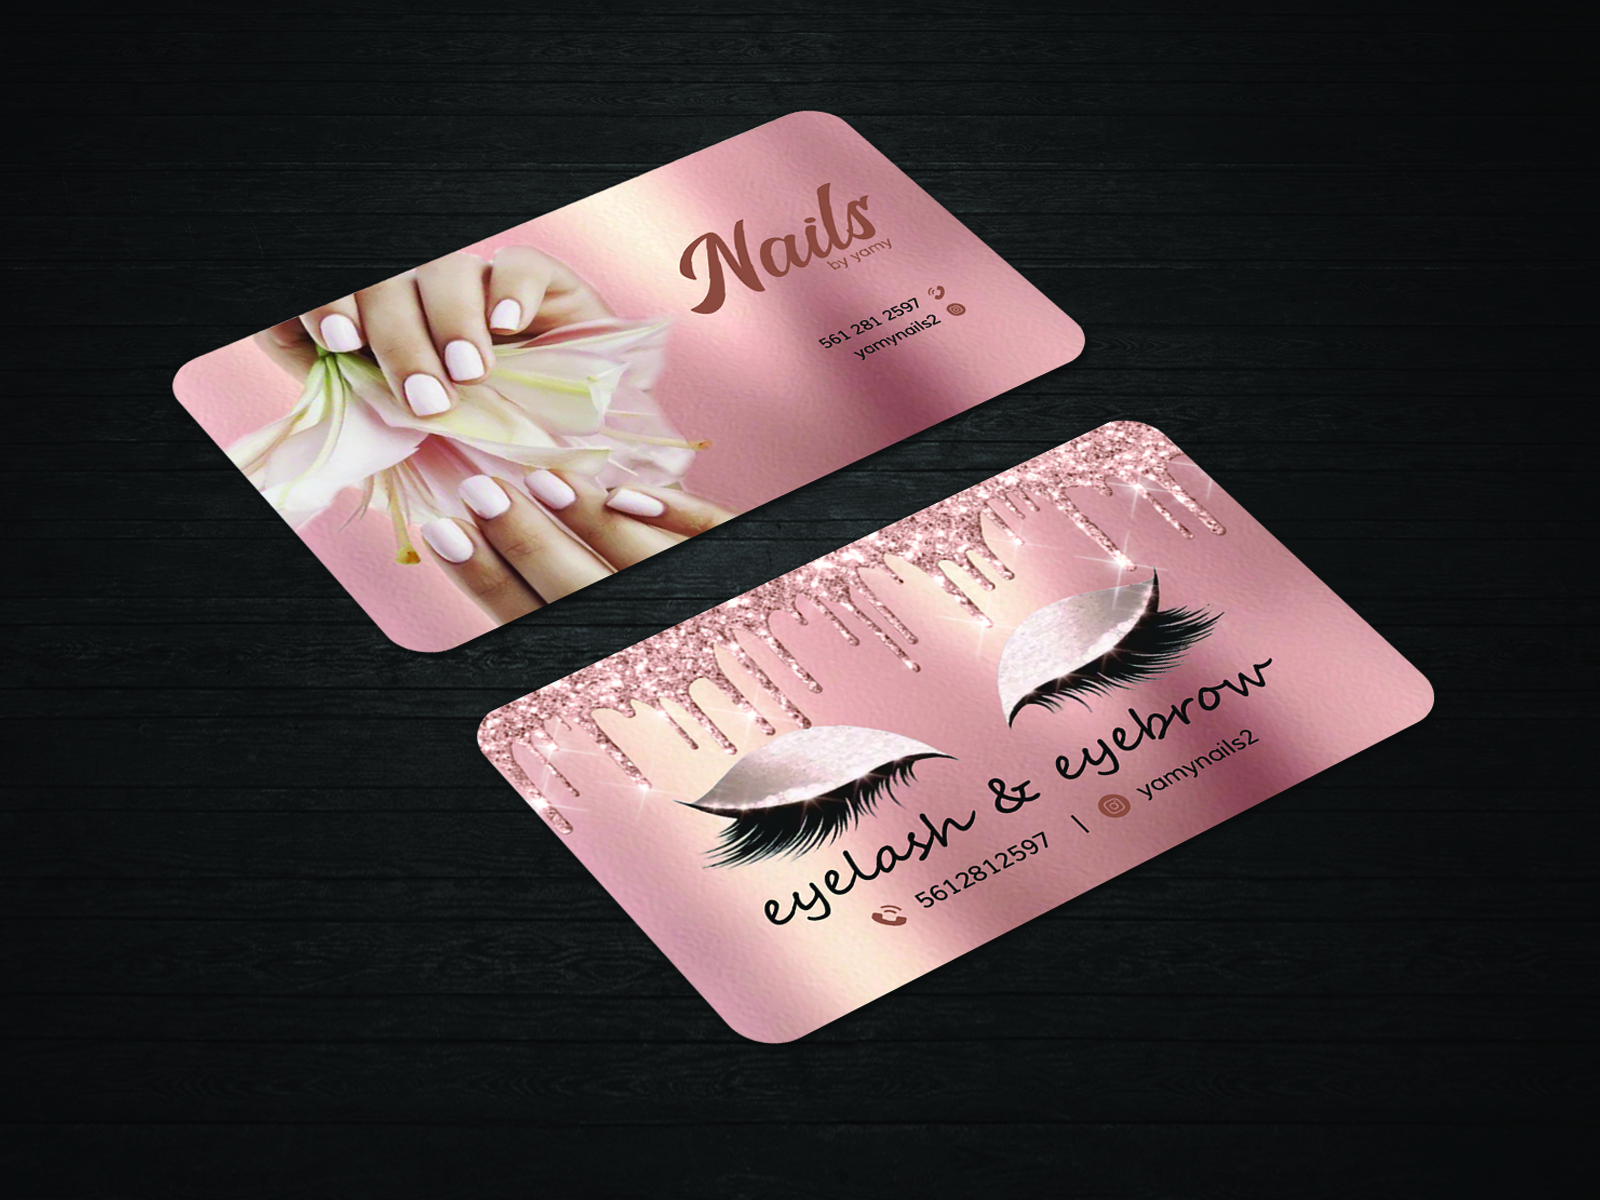 Nale and eyelash business card design by Md. Risfatullah on Dribbble